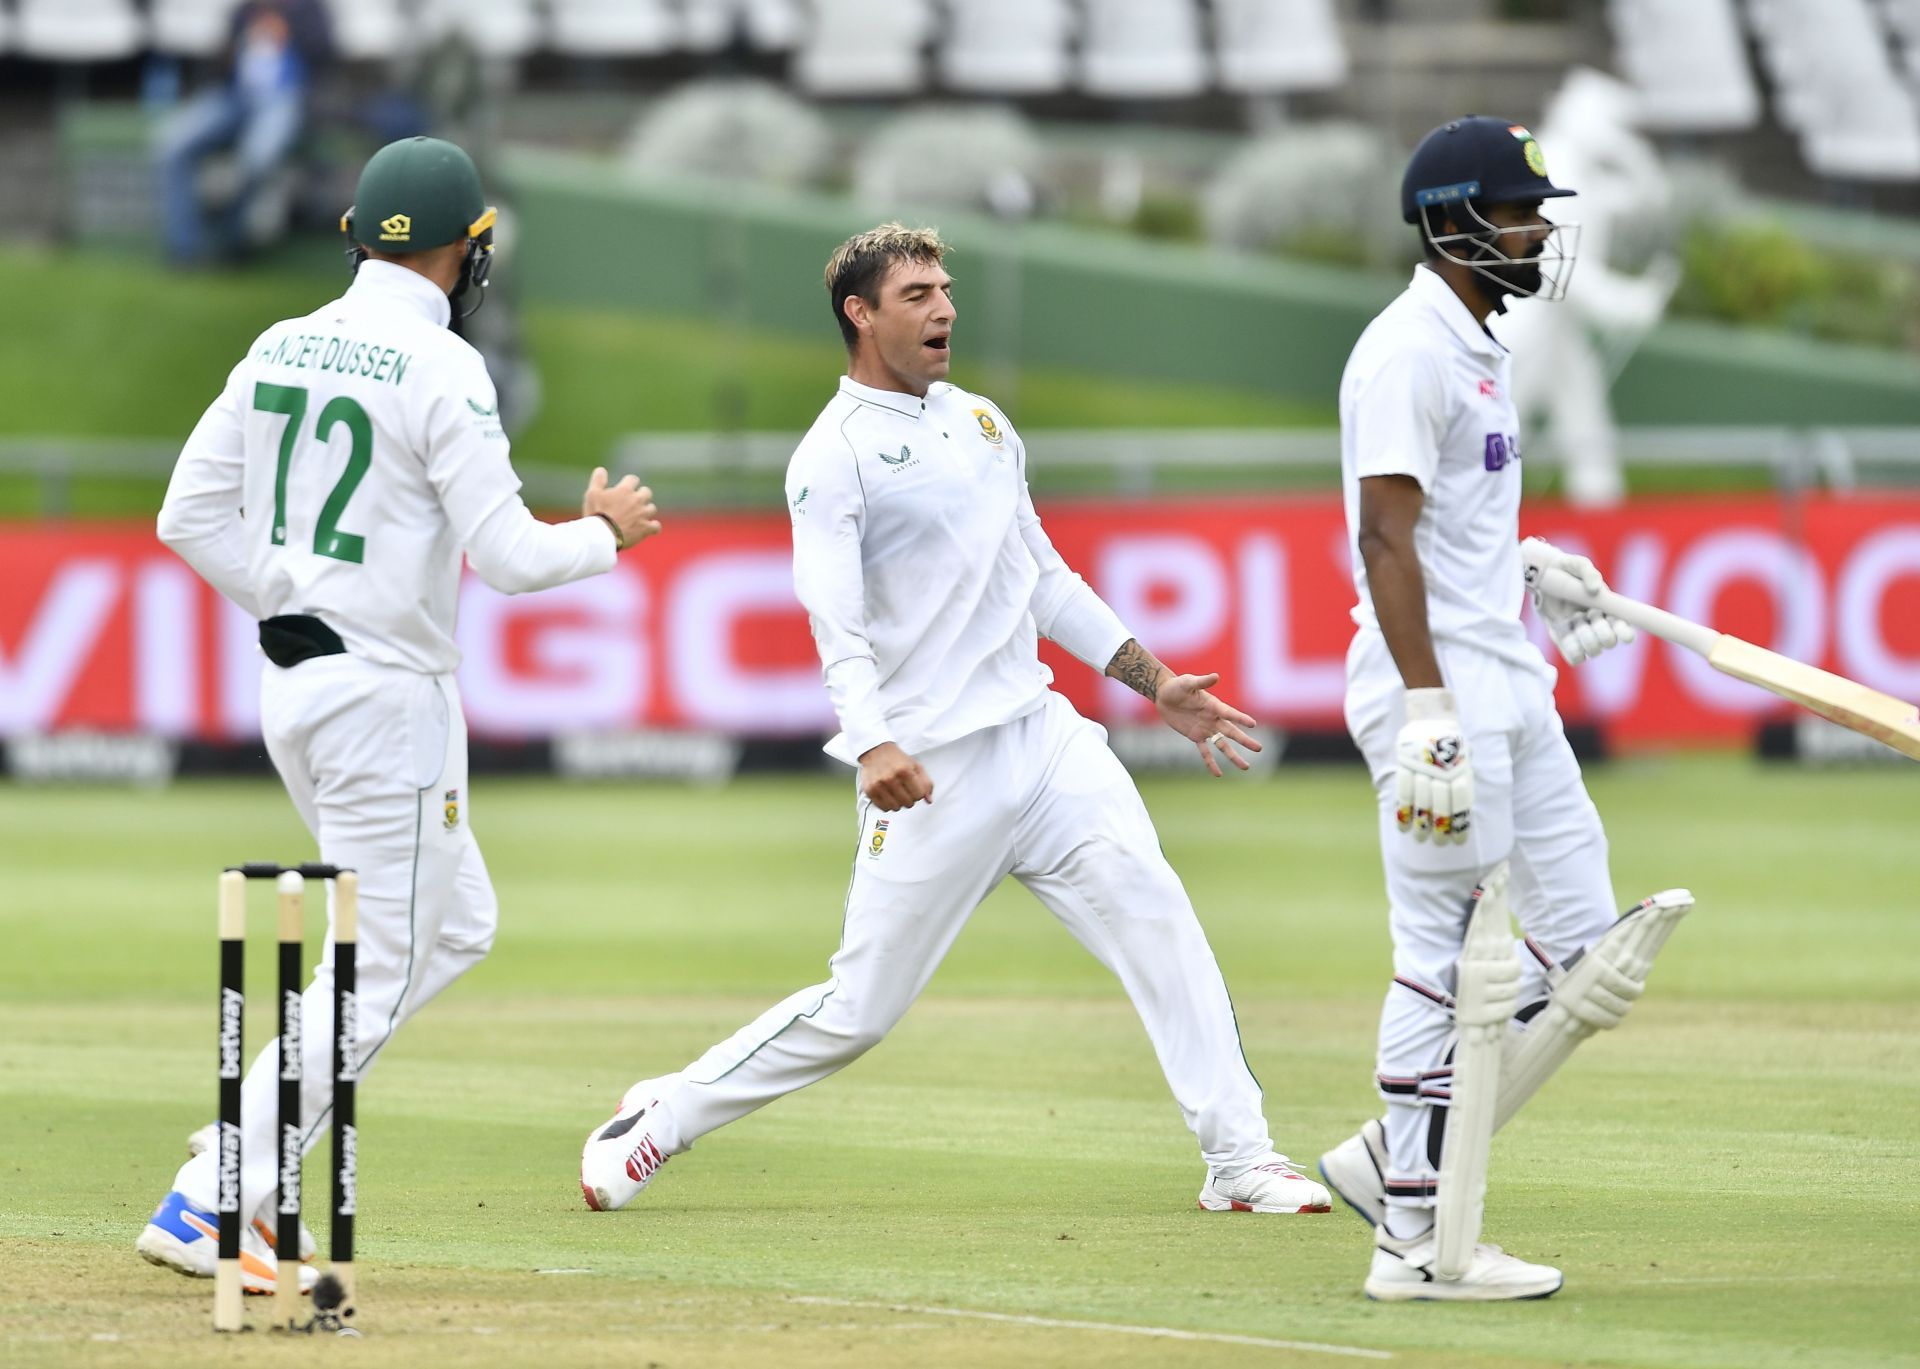 The 3rd India vs South Africa Test got off to a blazing start